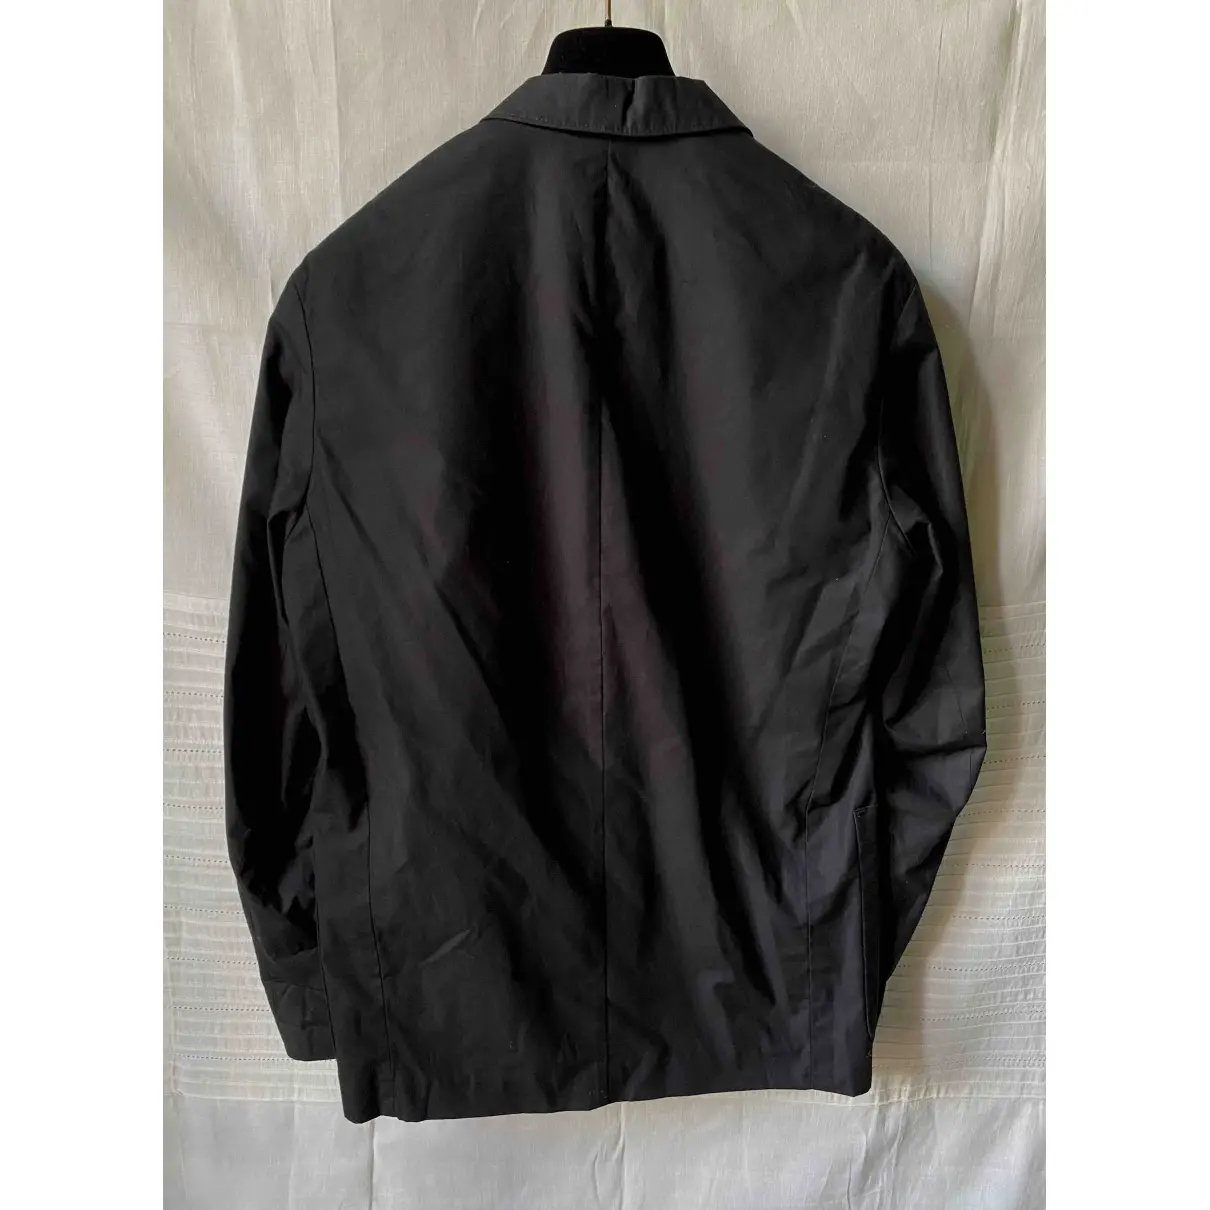 Buy Lemaire Jacket online